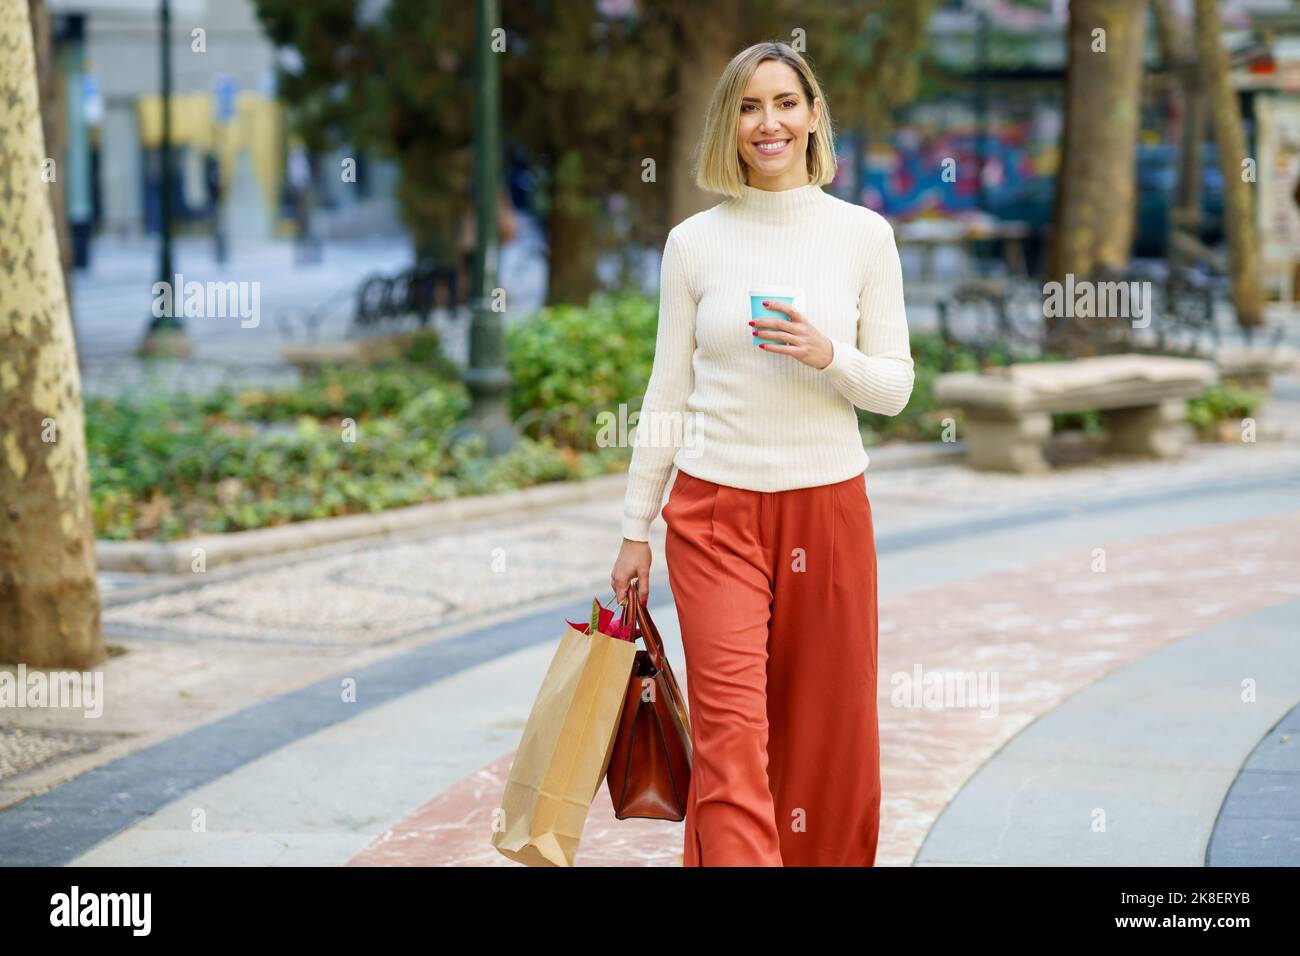 Smiling woman with shopping bags and takeaway drink Stock Photo